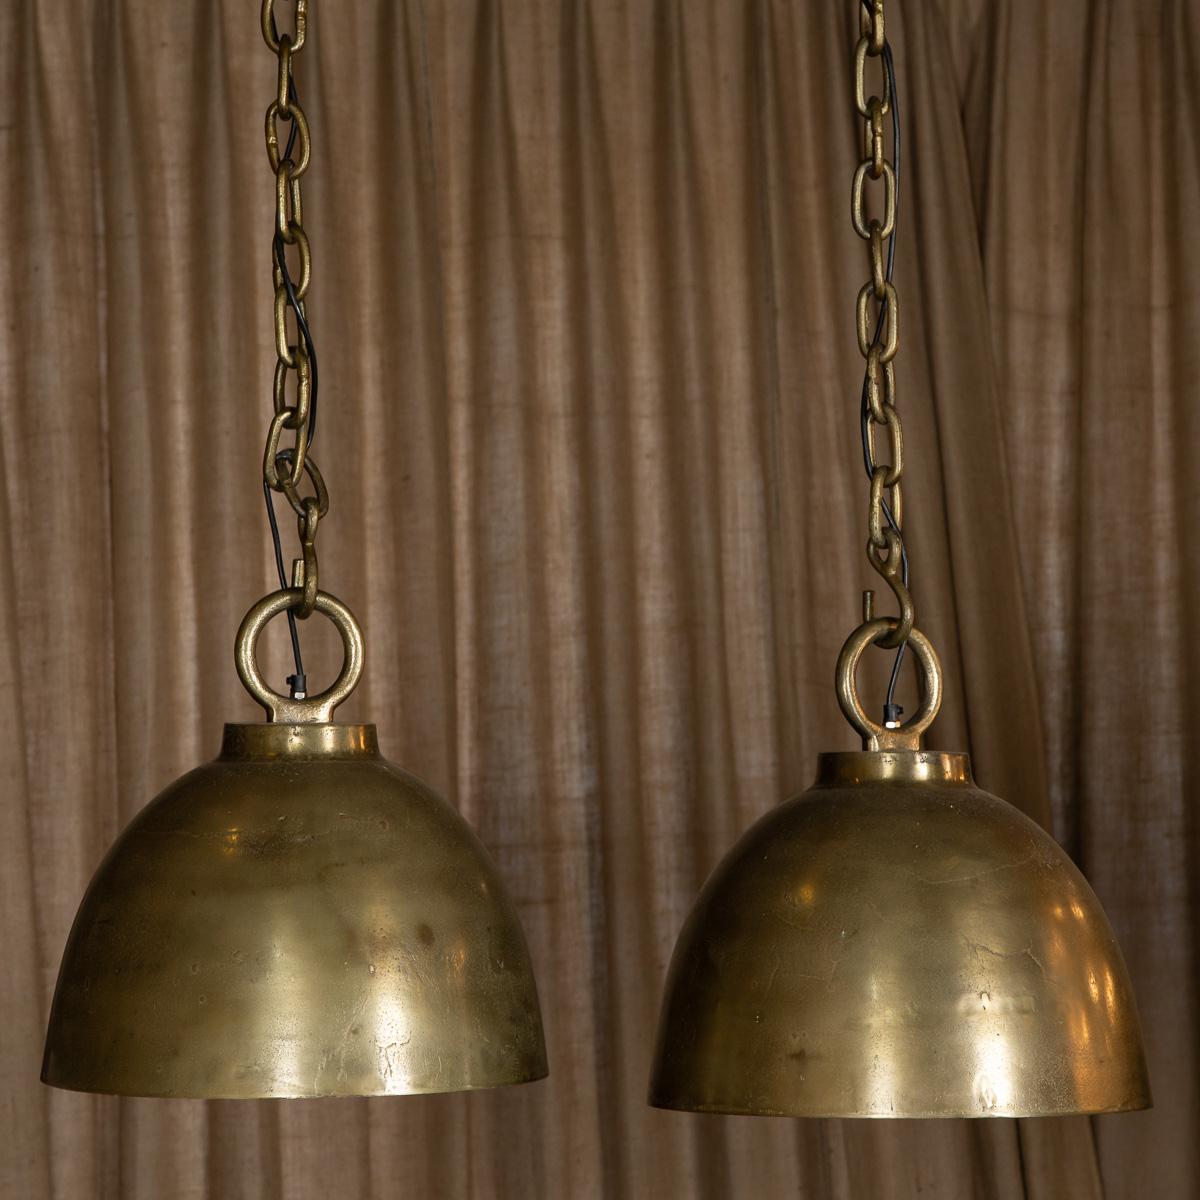 A Pair of large continental brass plated lights in a cloche shape with a heavy brass plated chain 158 cm total length with the light shade.

Condition:
In great condition - wear consistent with age.

Size:
Height: 50 cm
Diameter: 54 cm.